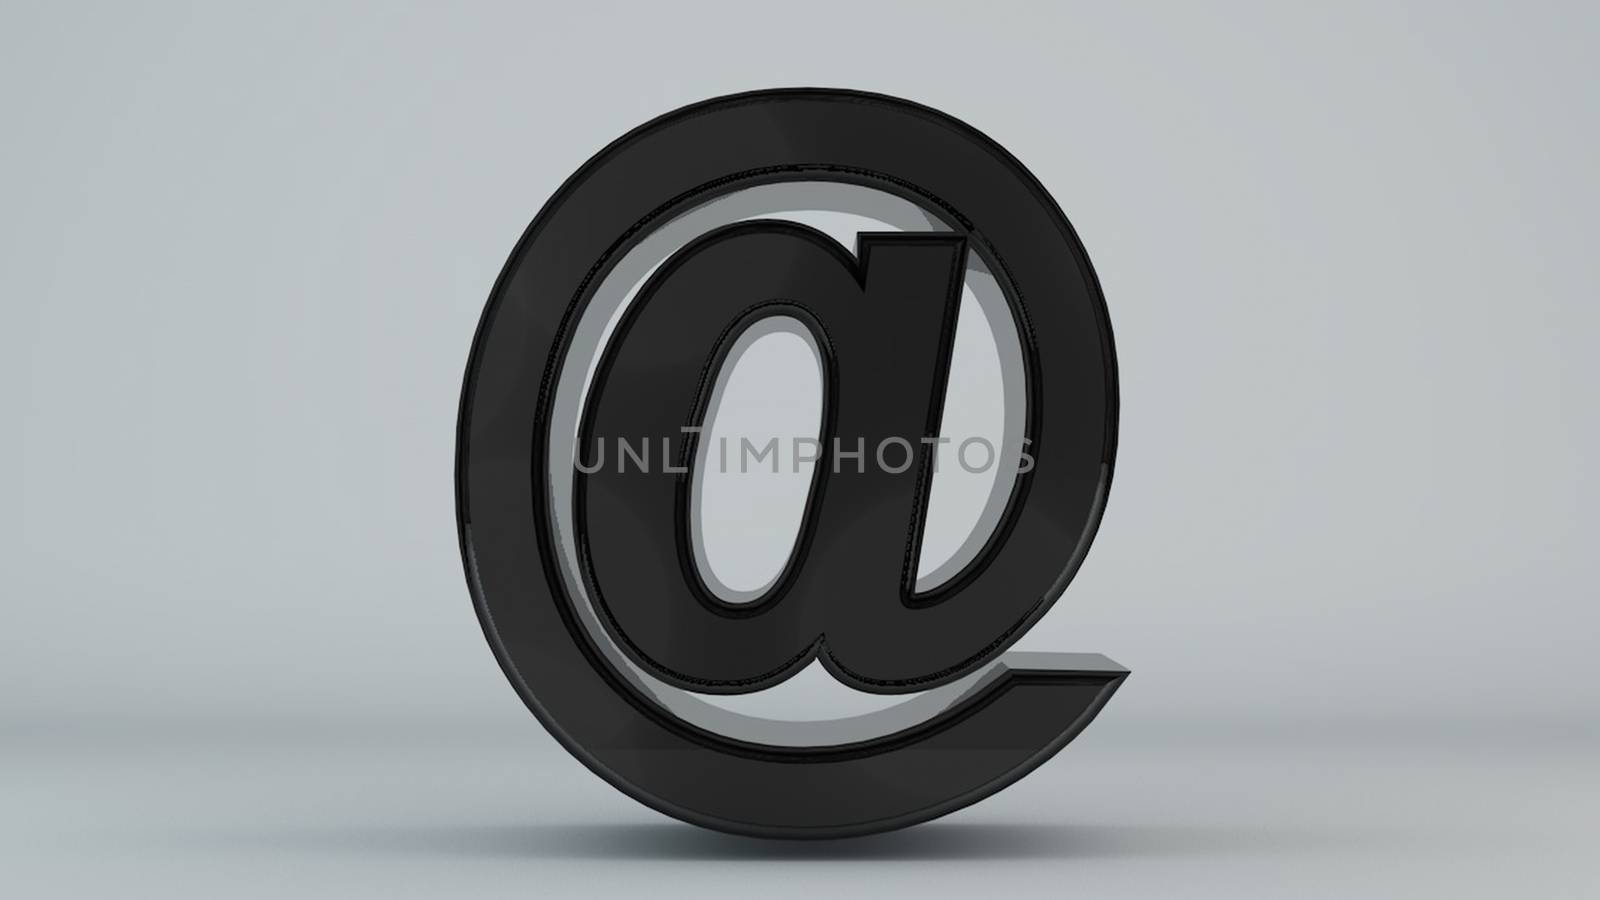 Abstract digital background with e-mail sign. 3d rendering